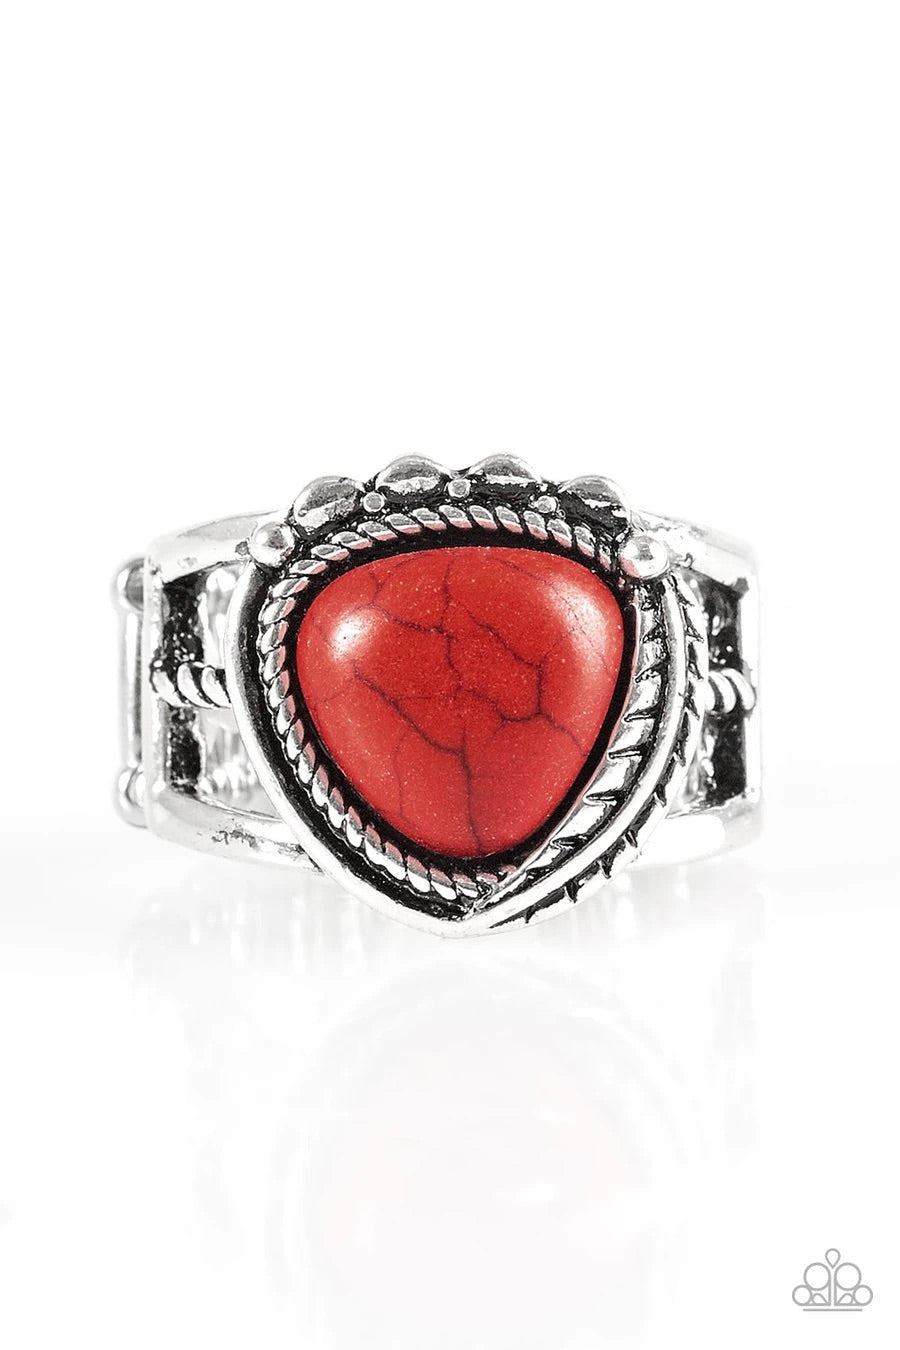 Cliff Climber - Red Stone - Silver Ring - Paparazzi Accessories